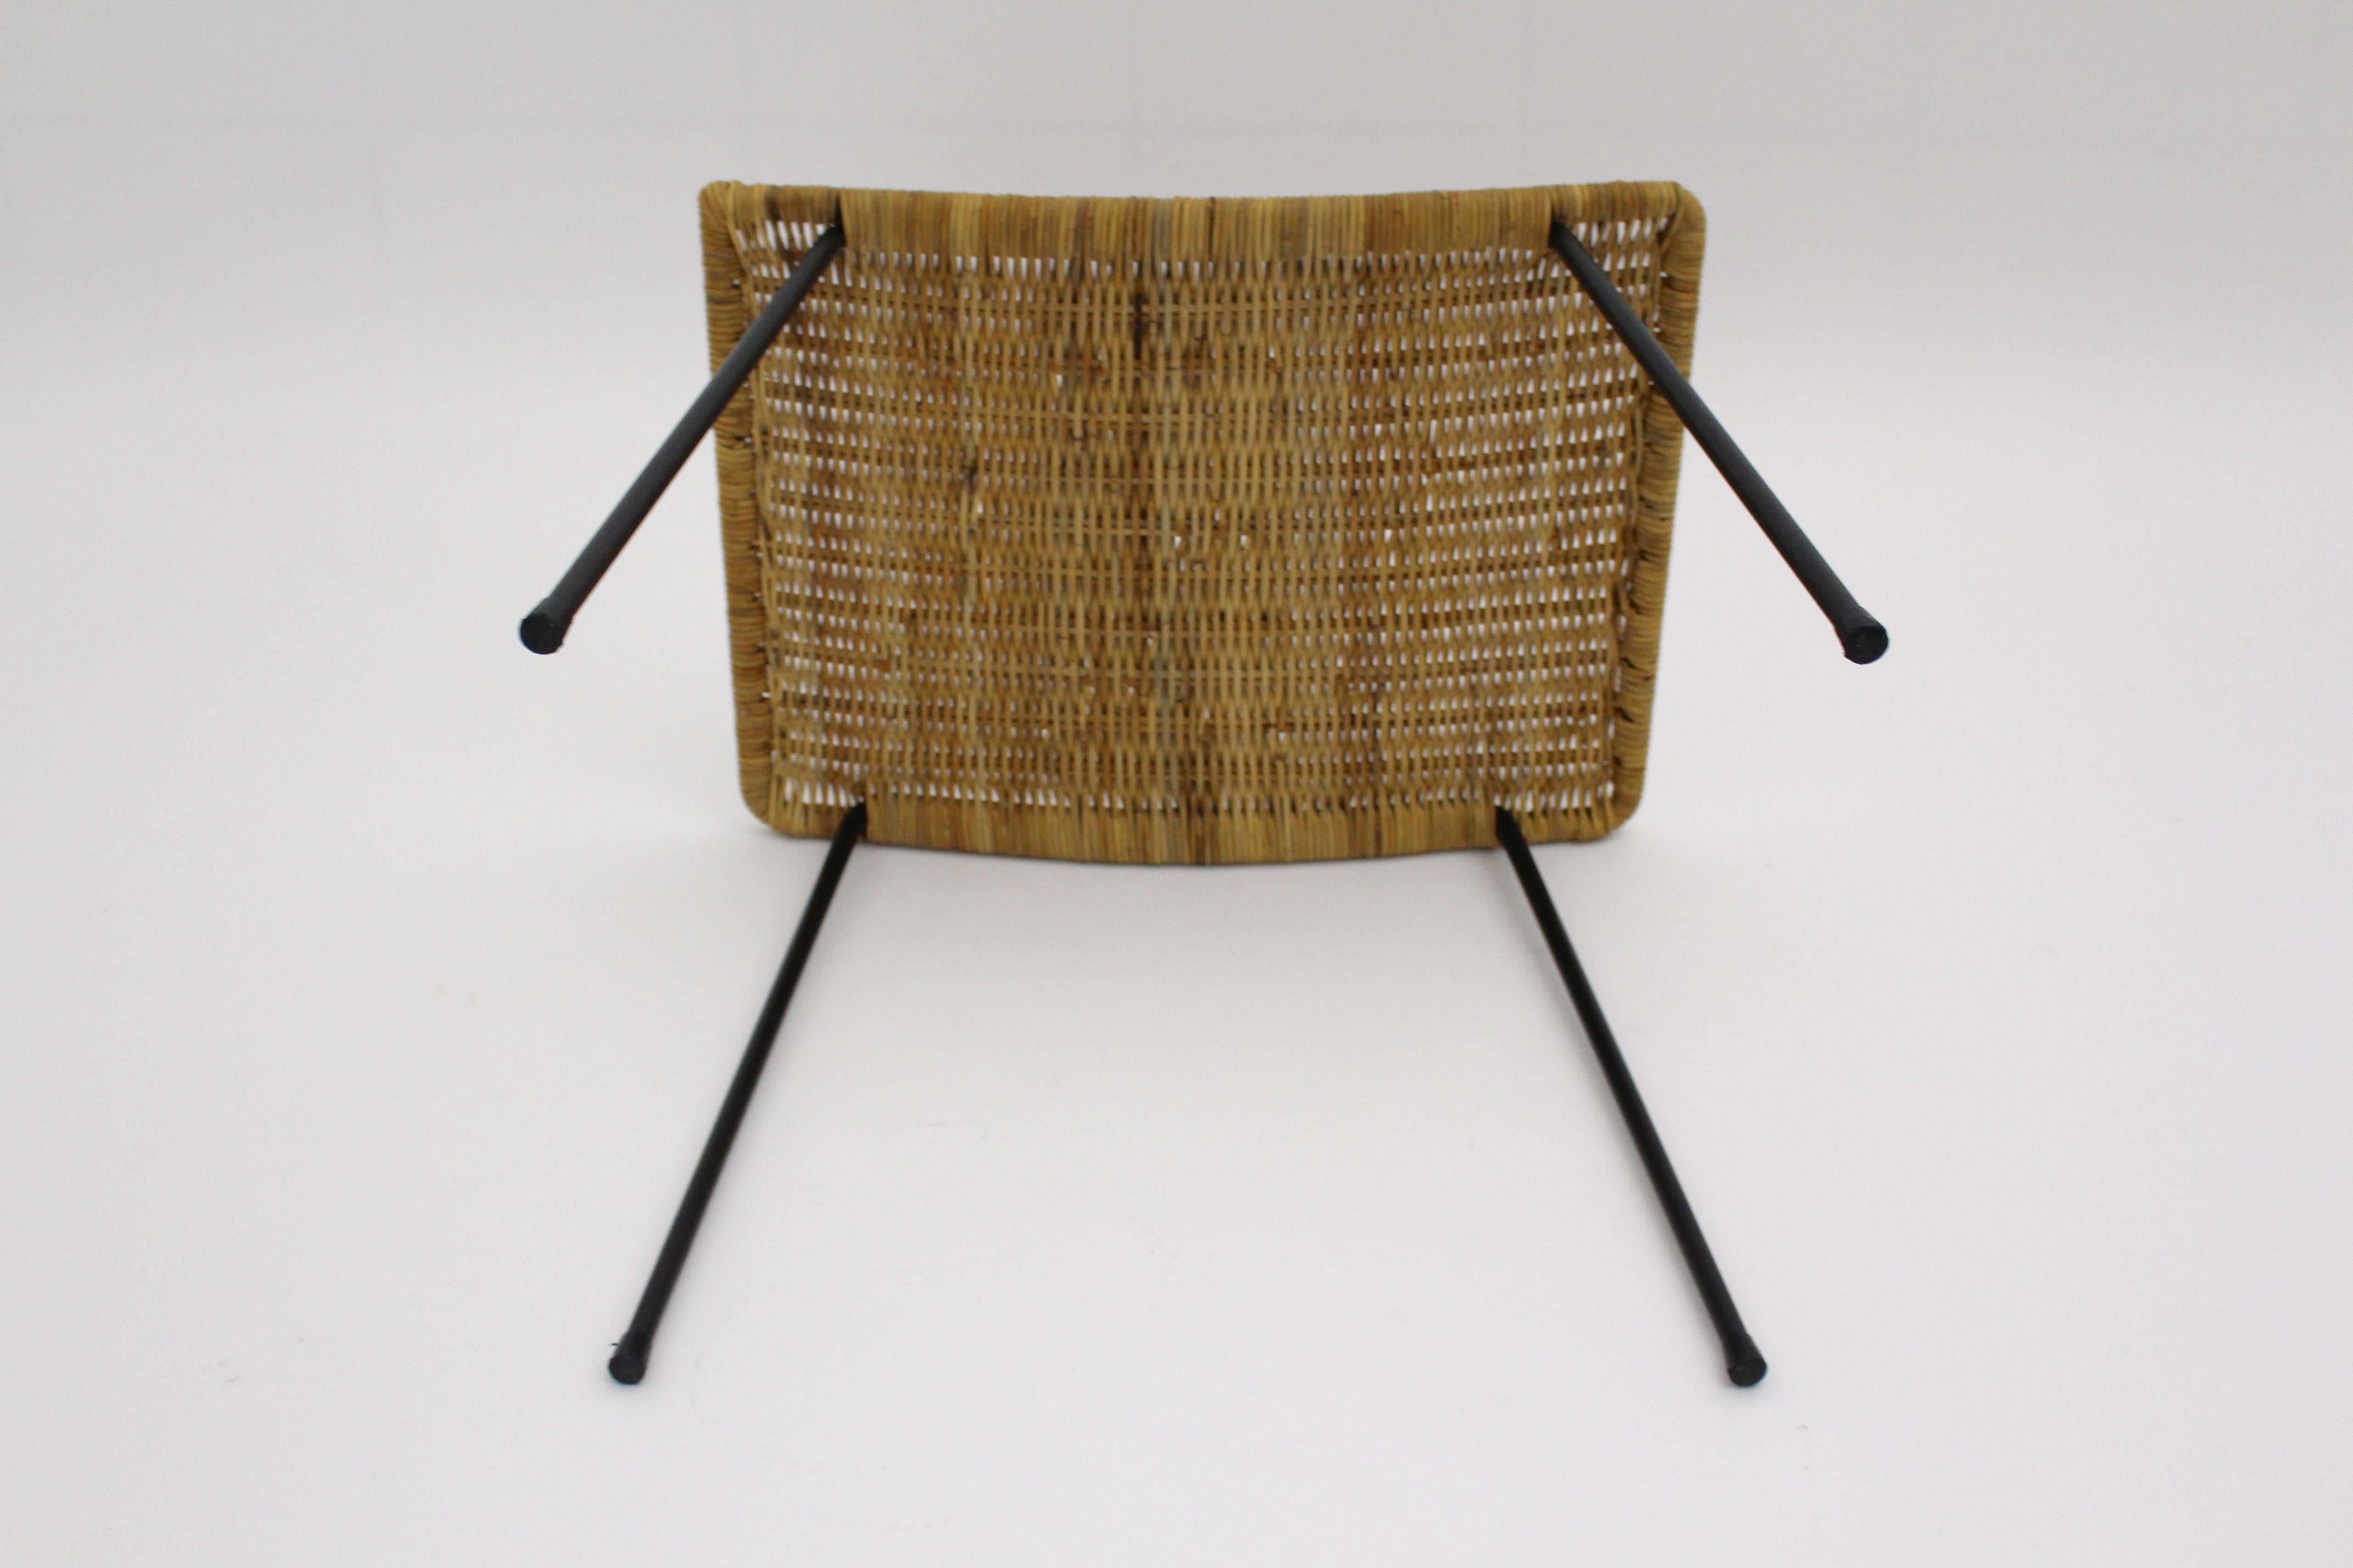 Lacquered Mid-Century Modern Organic Vintage Rattan Metal Stool, 1950s, Austria For Sale